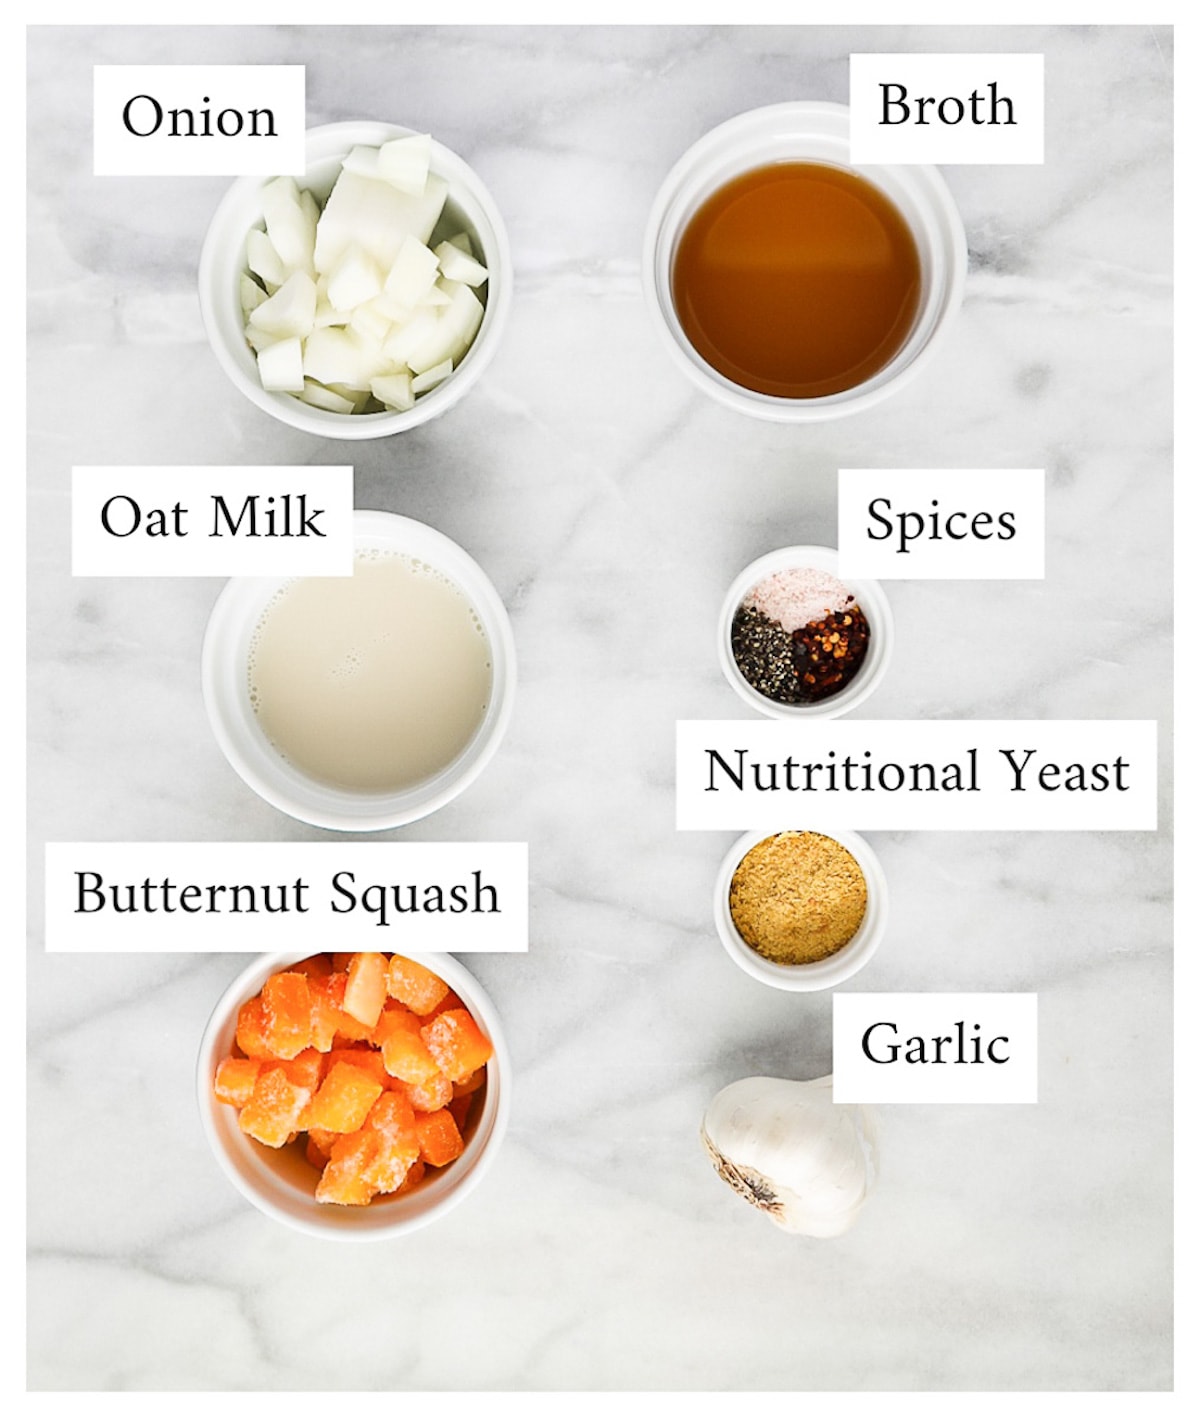 Labeled ingredients including: onion, broth, oat milk, spices, nutritional yeast, butternut squash, and garlic.